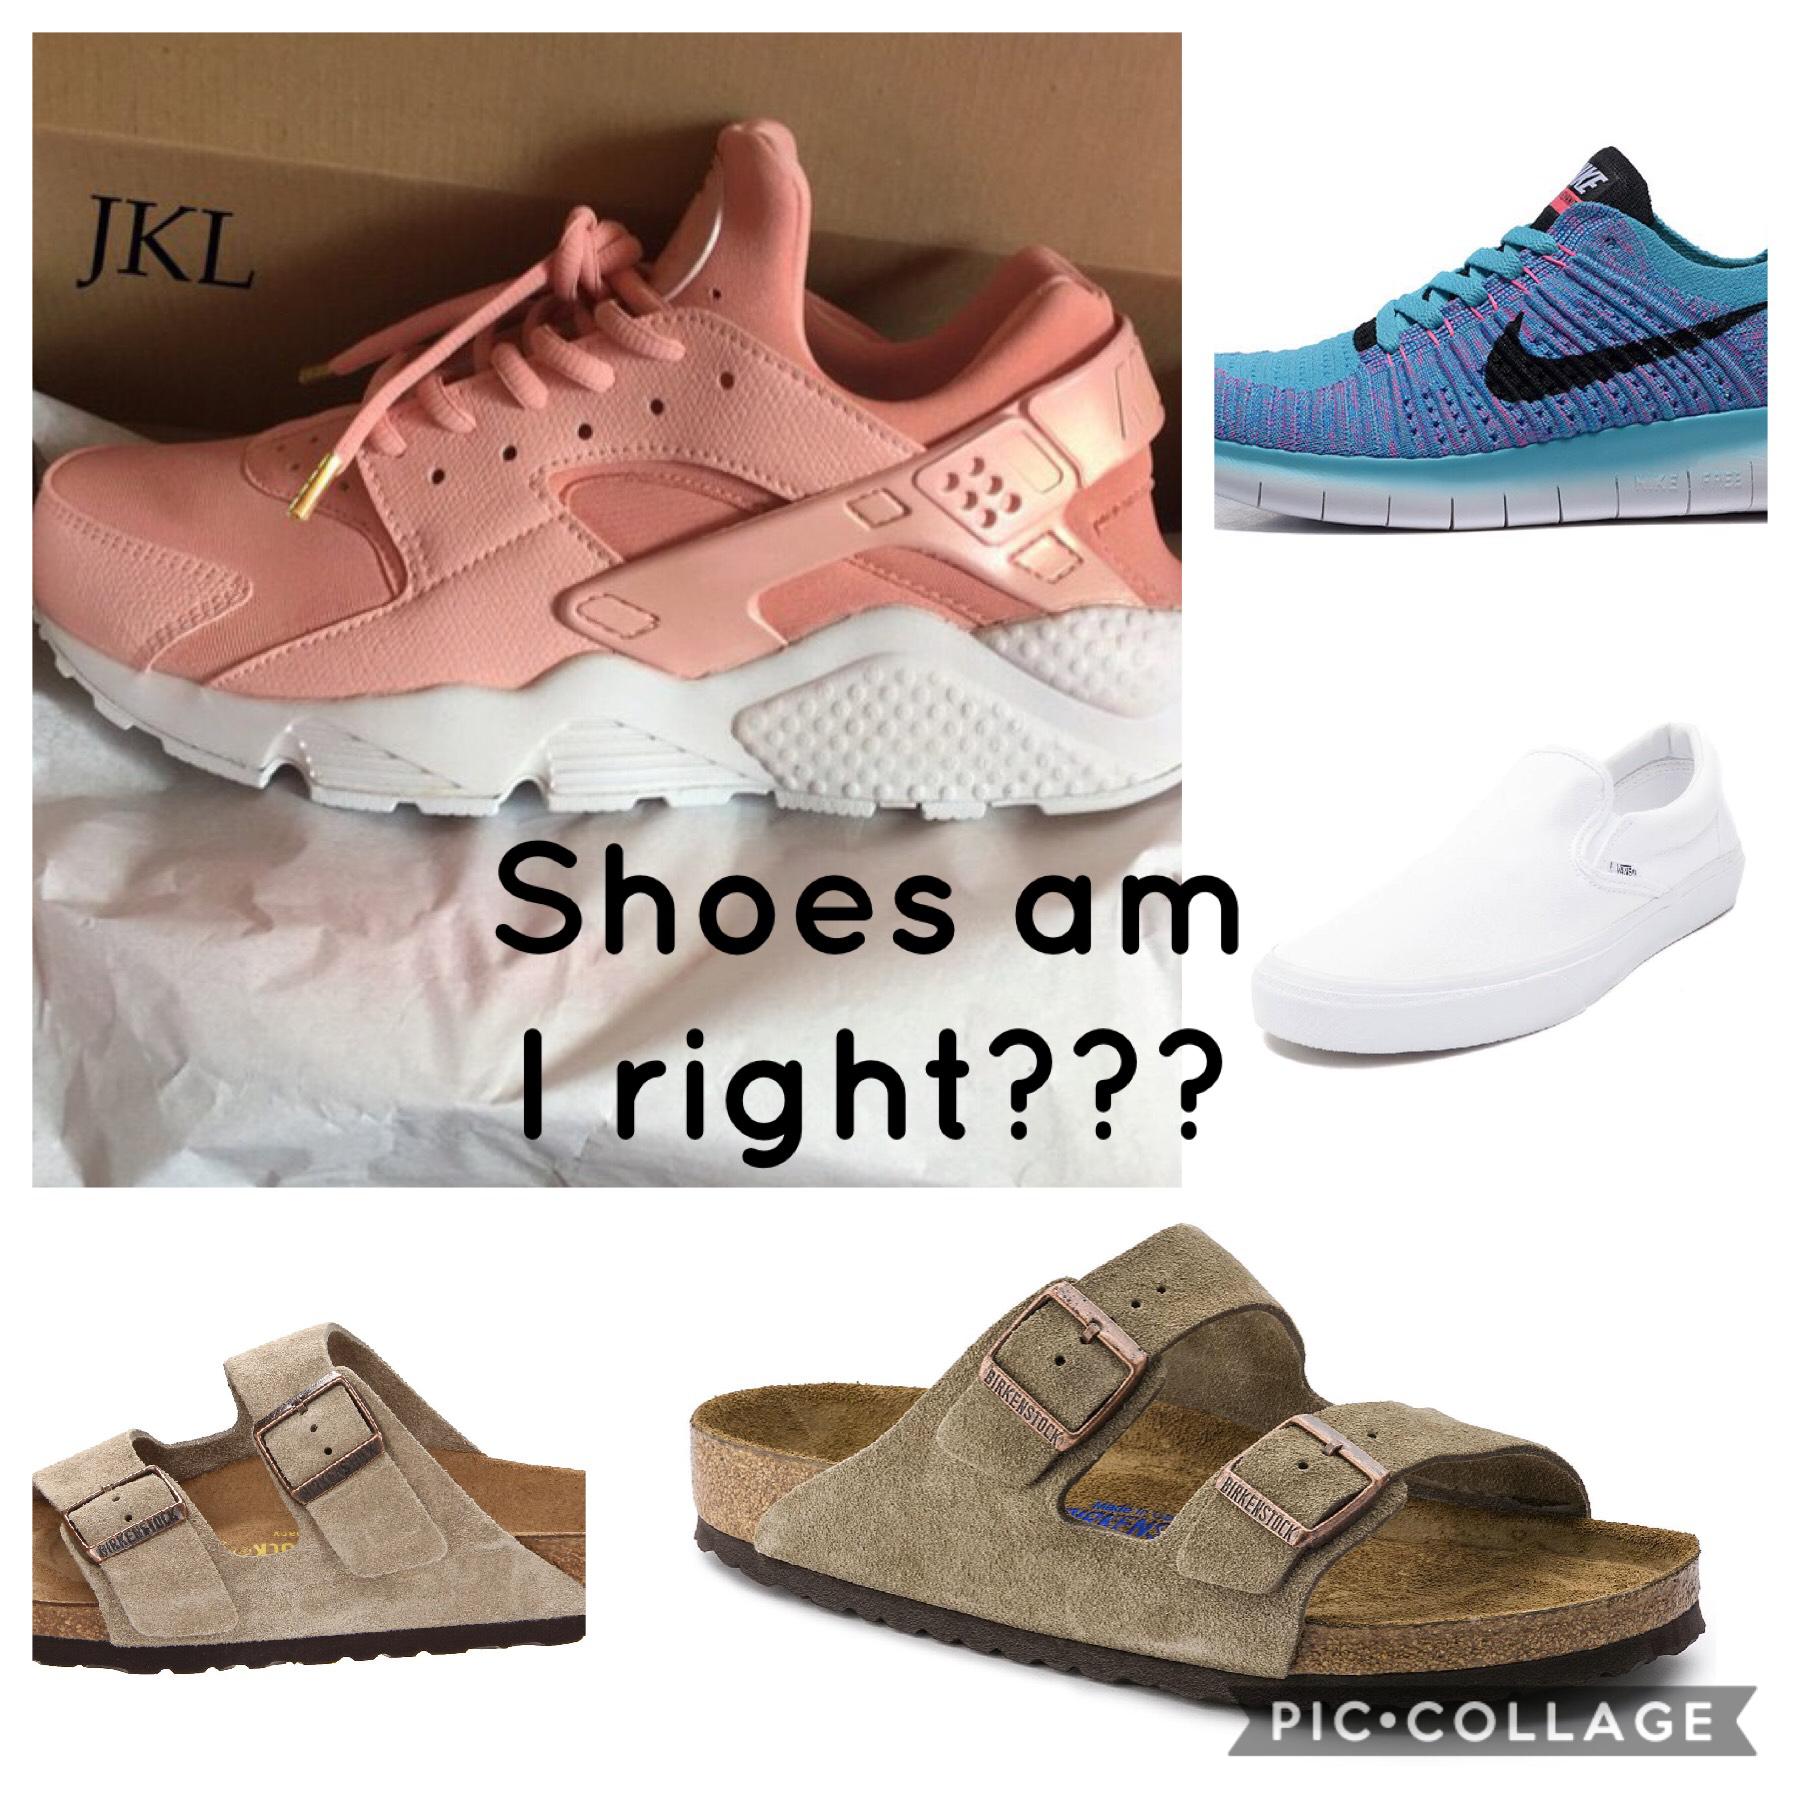 Shoes am I right???